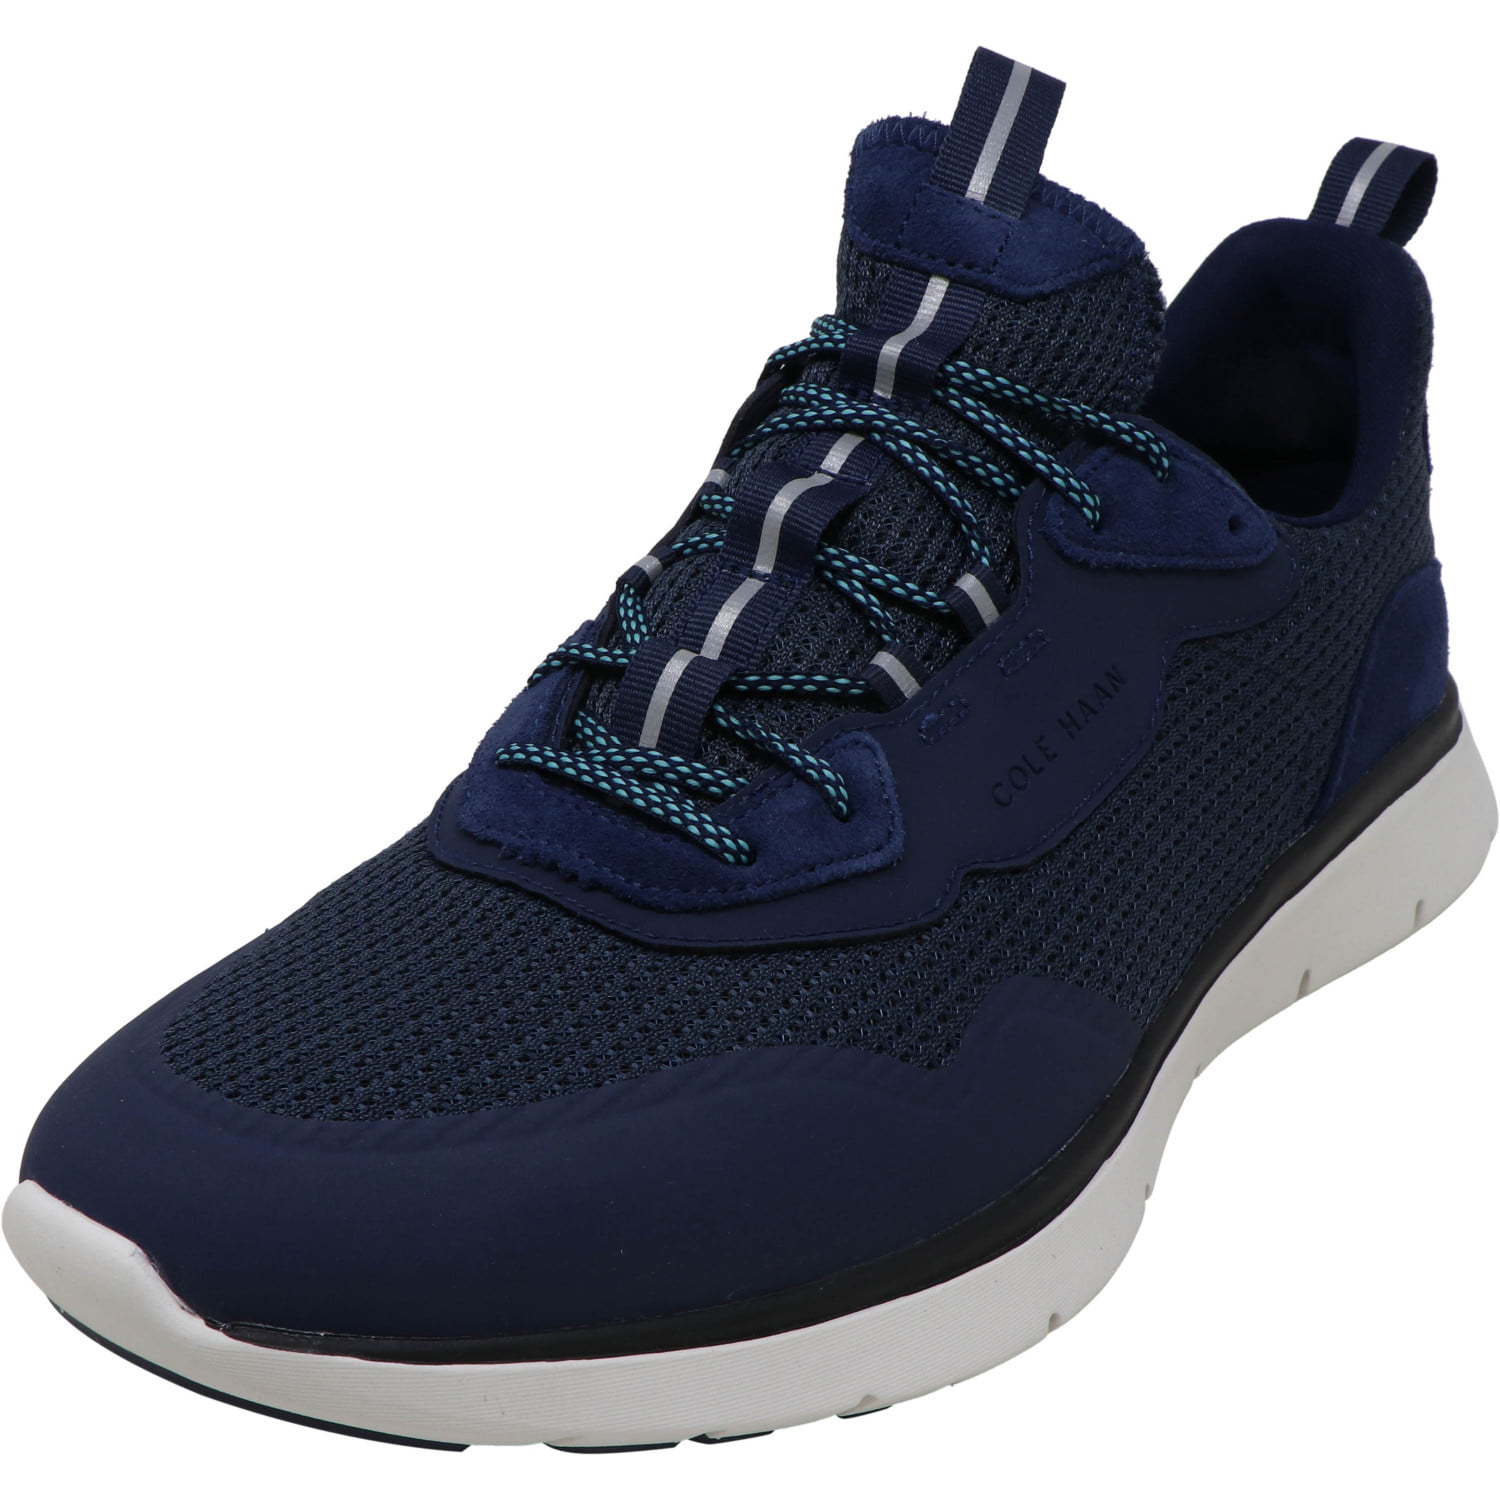 Cole Haan - Cole Haan Men's Zerogrand Trainer Ombre Blue Ankle-High ...